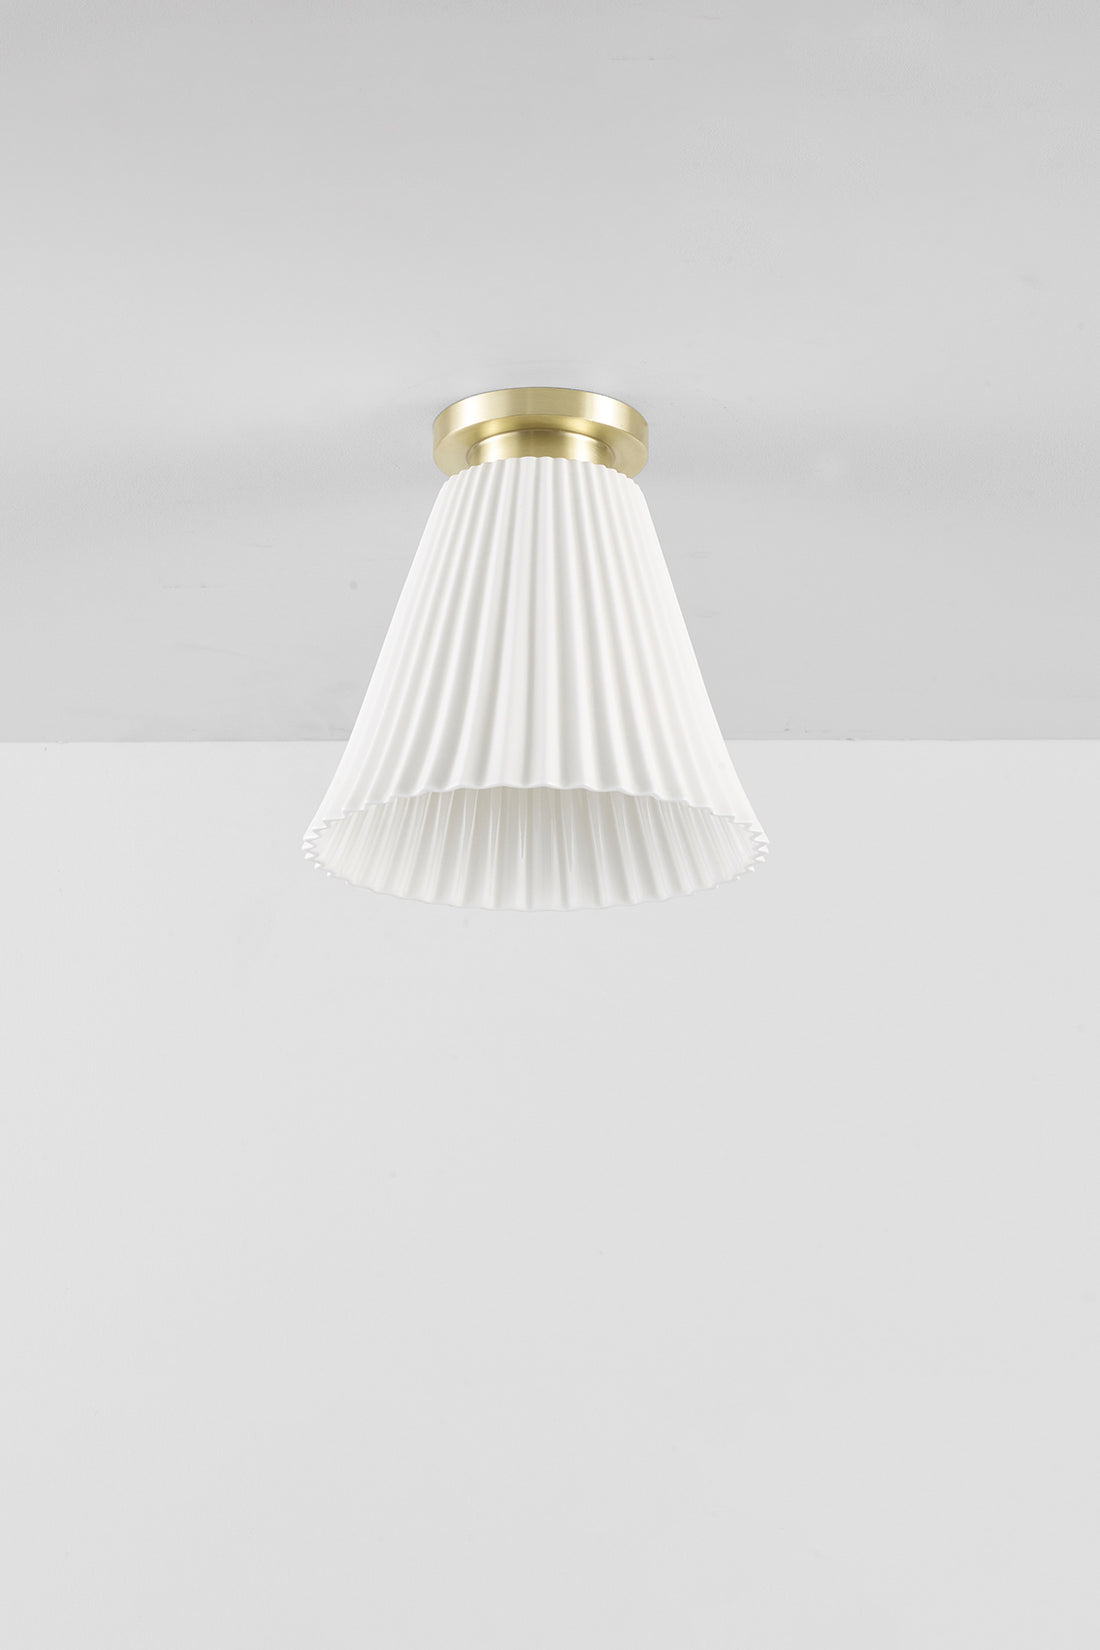 Hector Large Pleat Ceiling Light